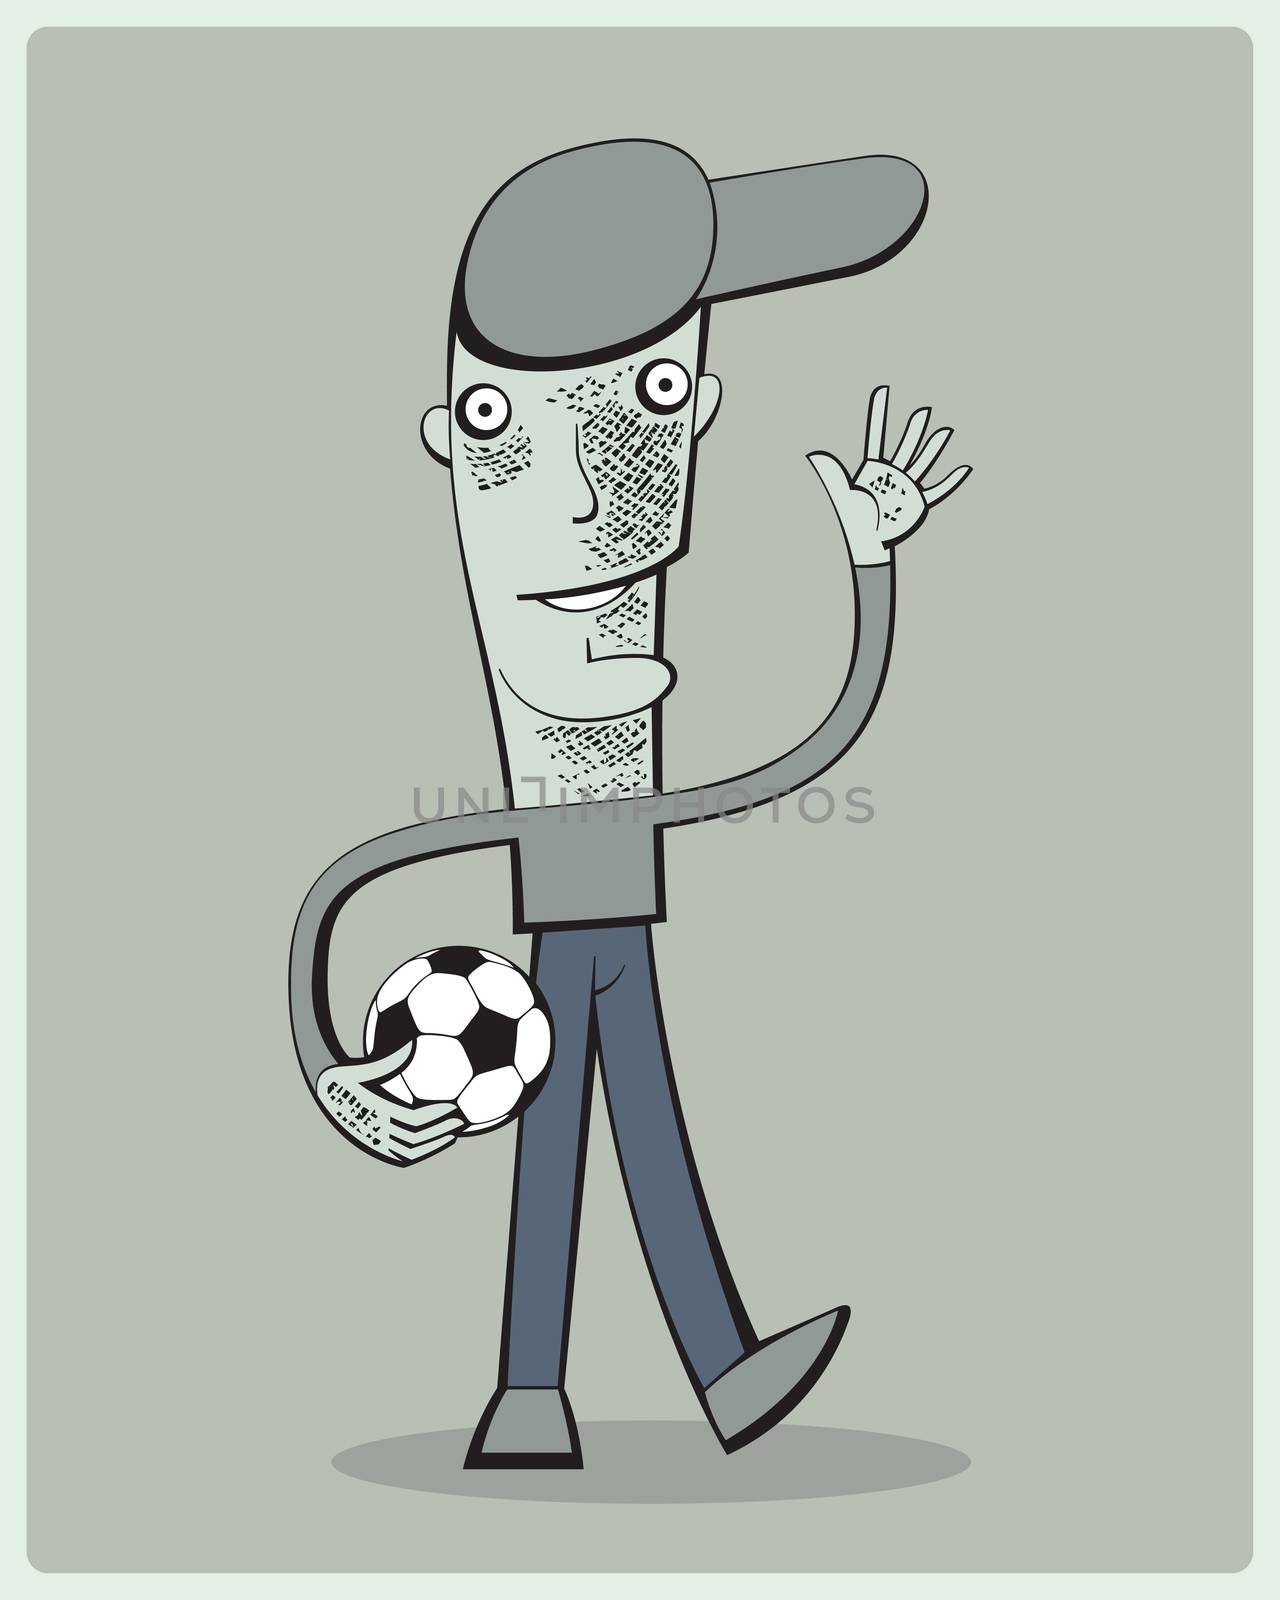 Soccer player waving by andrius